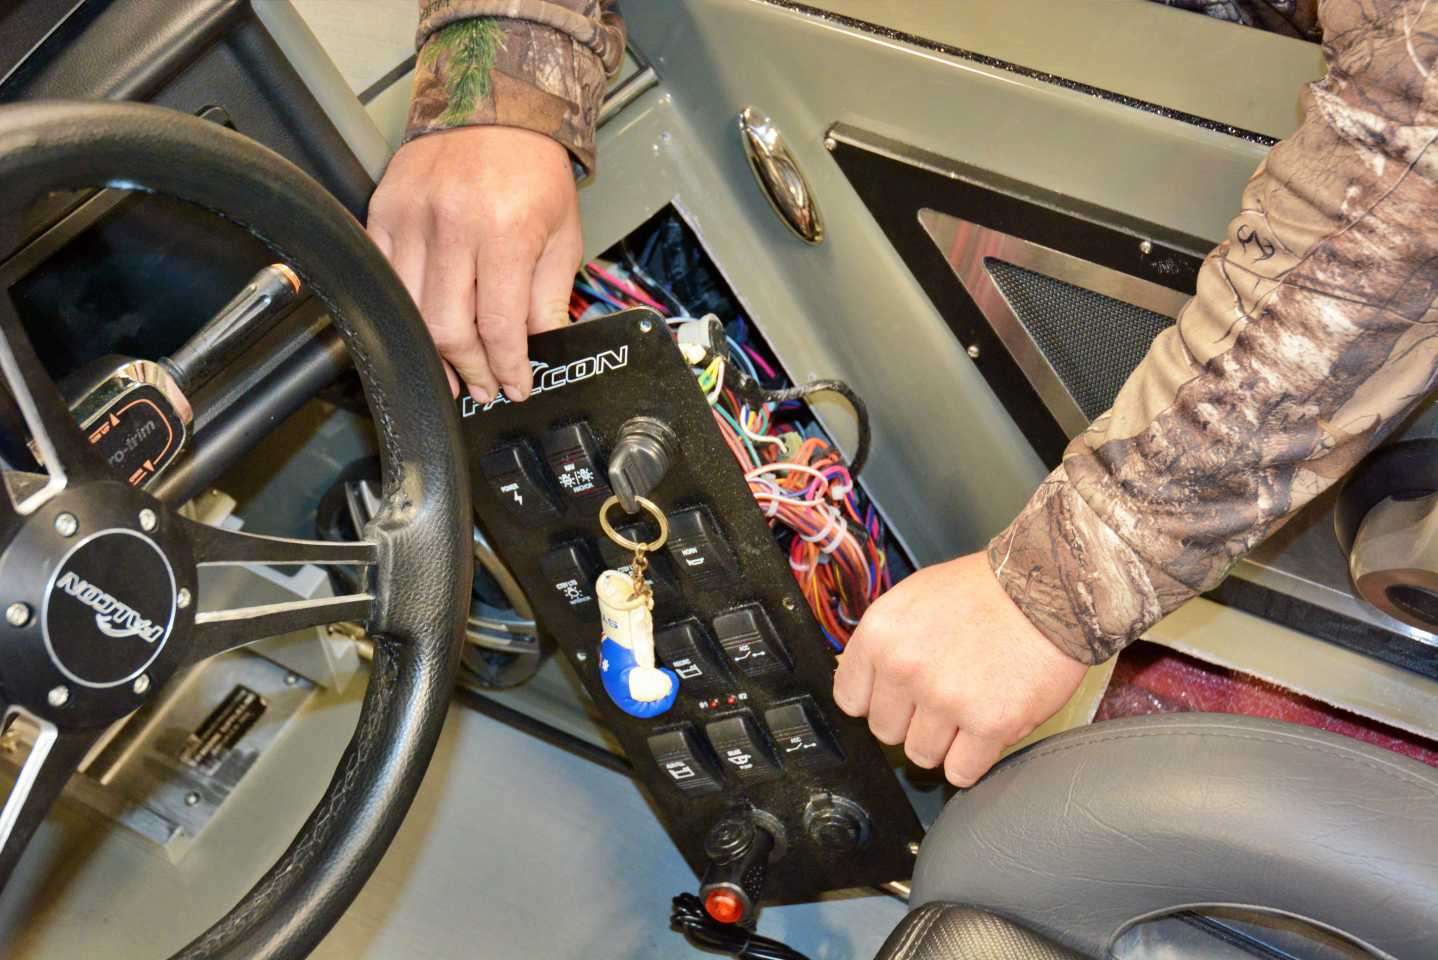 The first step when running wires through the boat is finding an access point for a wire snake. For the Falcon F20 Predator that is accomplished by removing this switch panel located below the dashboard. Doing so will allow the wire snake to reach the bow, and be pulled from the rear of the boat. 
